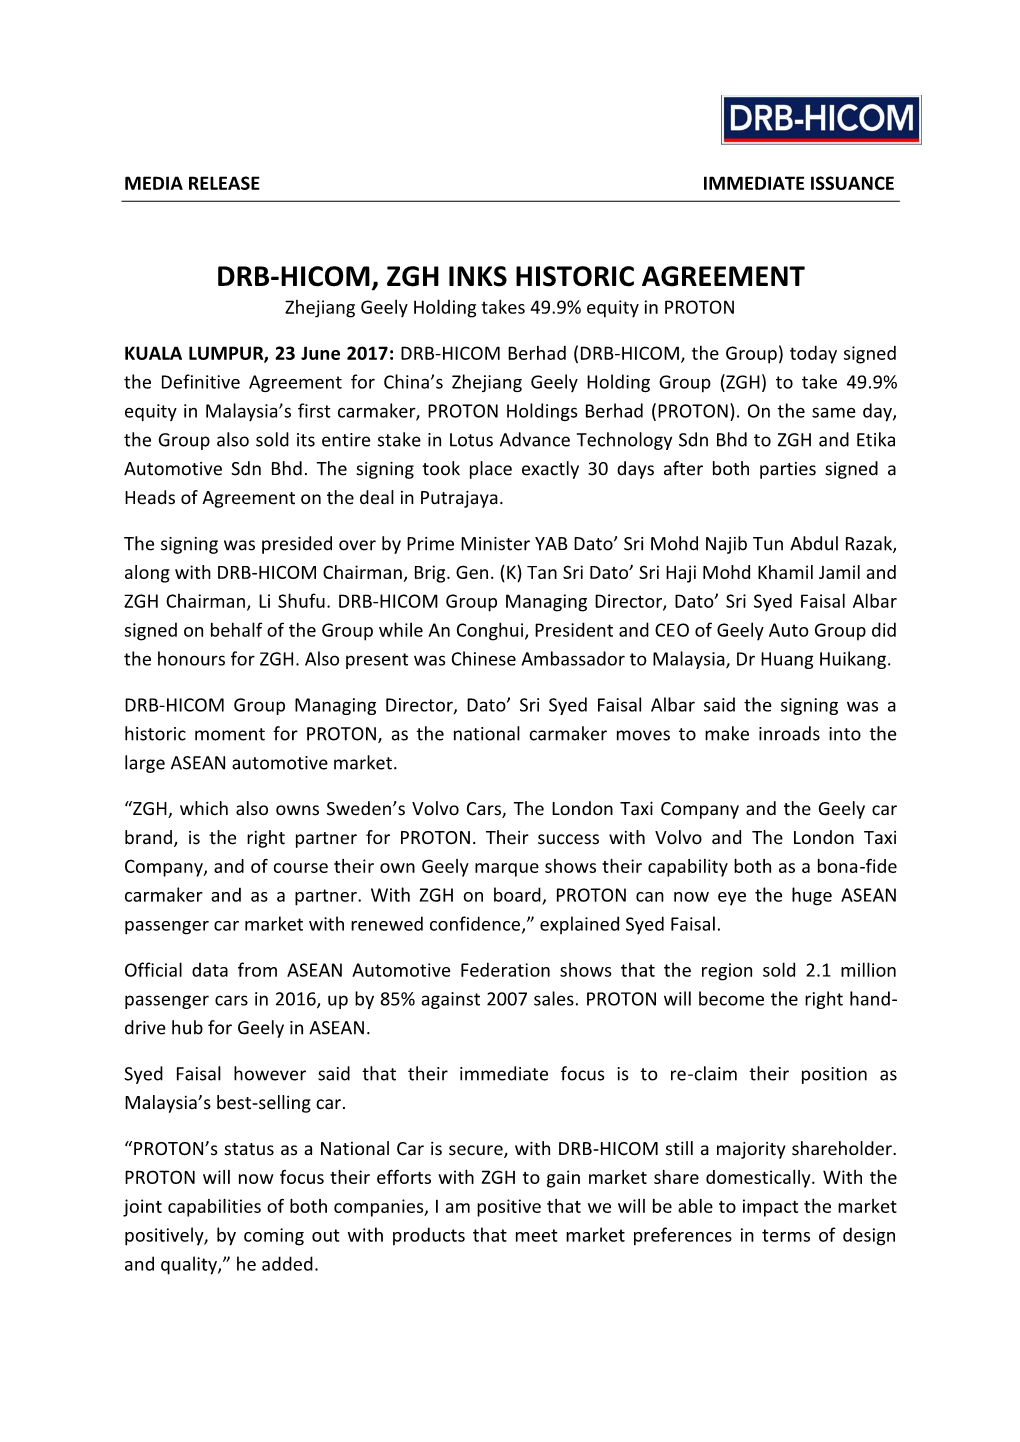 DRB-HICOM, ZGH INKS HISTORIC AGREEMENT Zhejiang Geely Holding Takes 49.9% Equity in PROTON